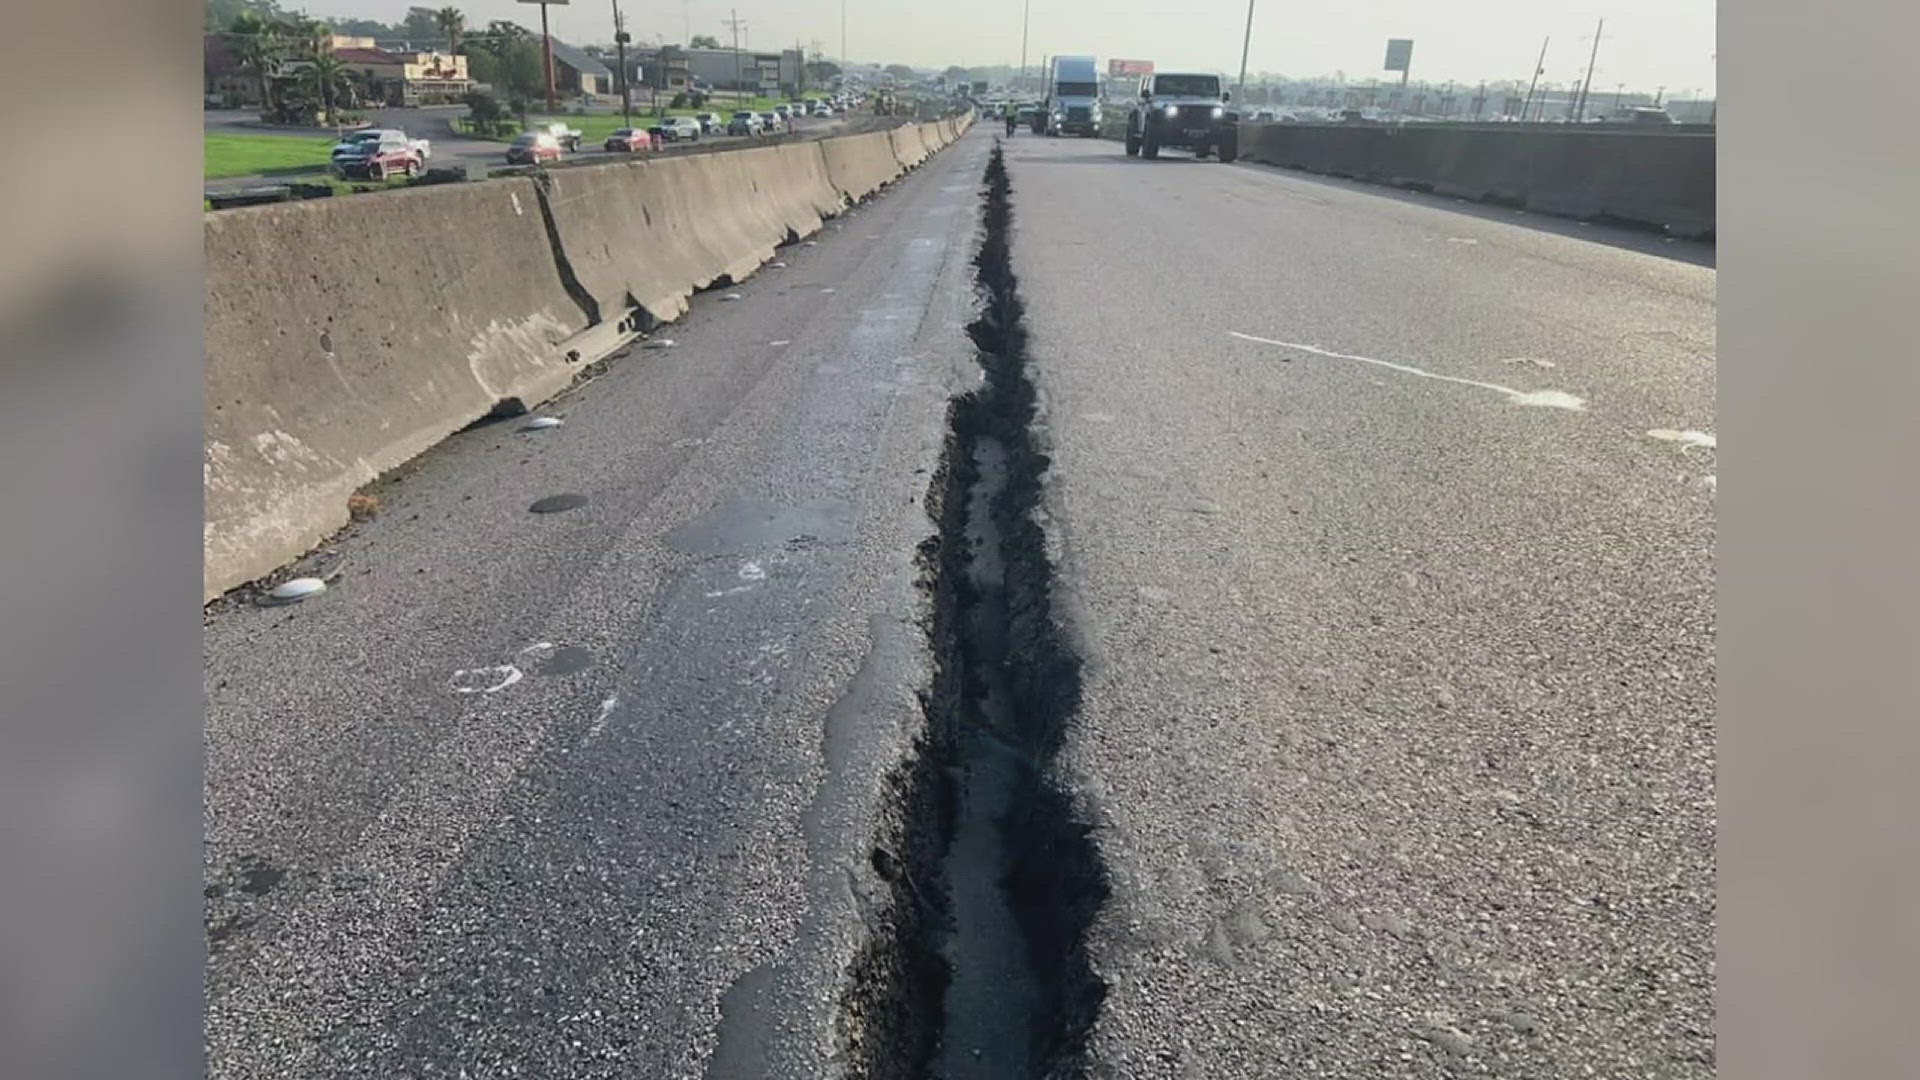 The widening project happening in the area and construction contributed to the pavement becoming uneven, which led to the crack, according to TxDOT.